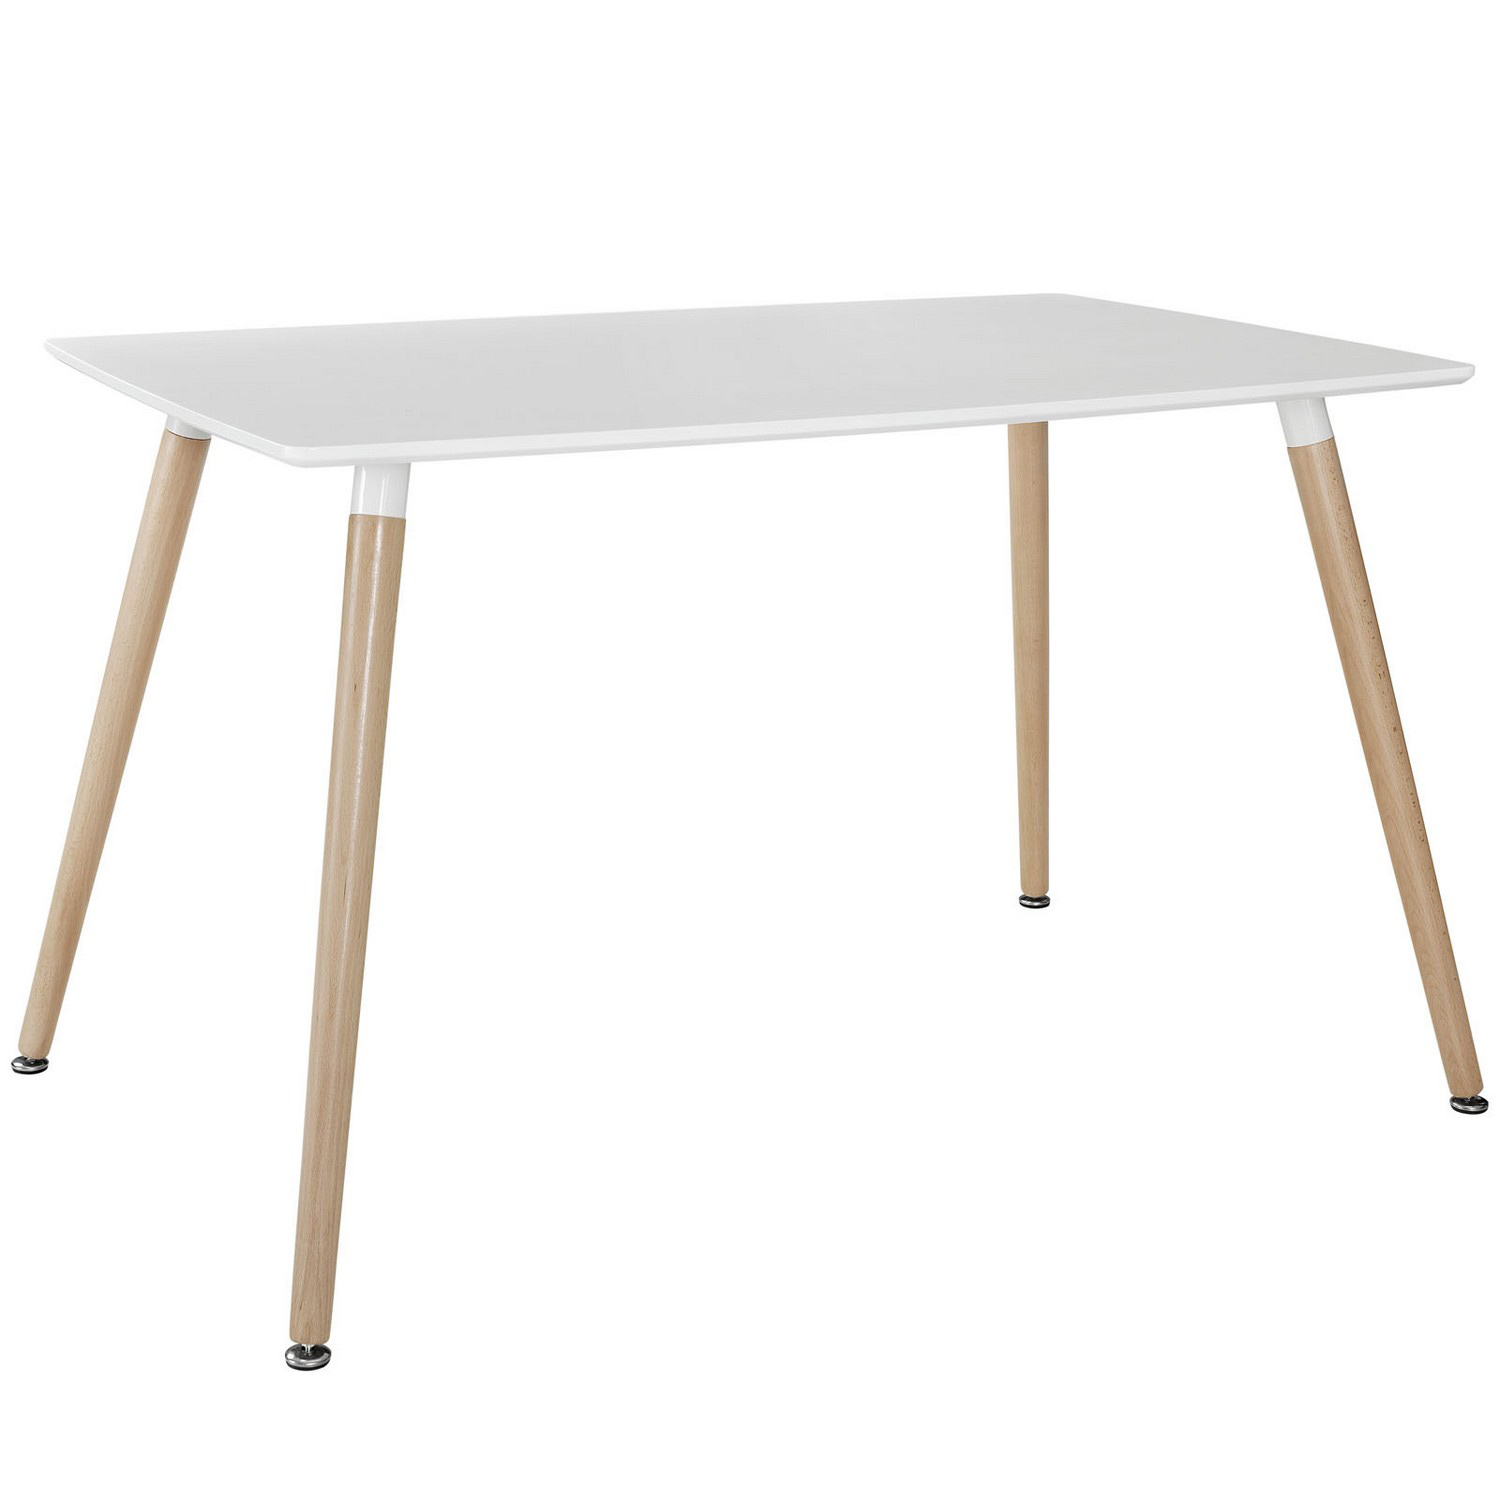 Modway Field Dining Table - White